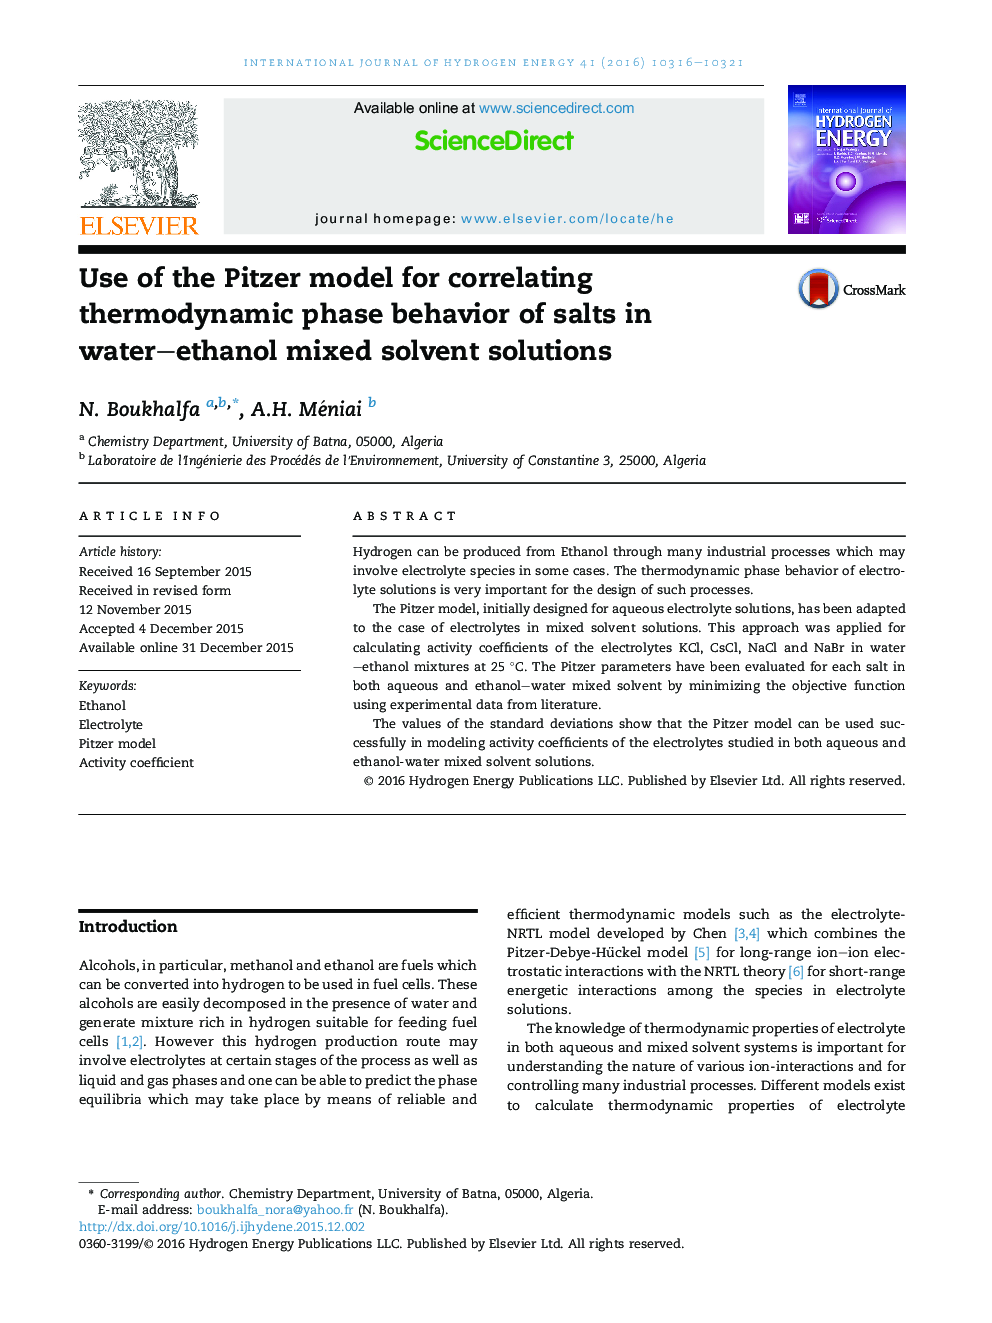 Use of the Pitzer model for correlating thermodynamic phase behavior of salts in water–ethanol mixed solvent solutions